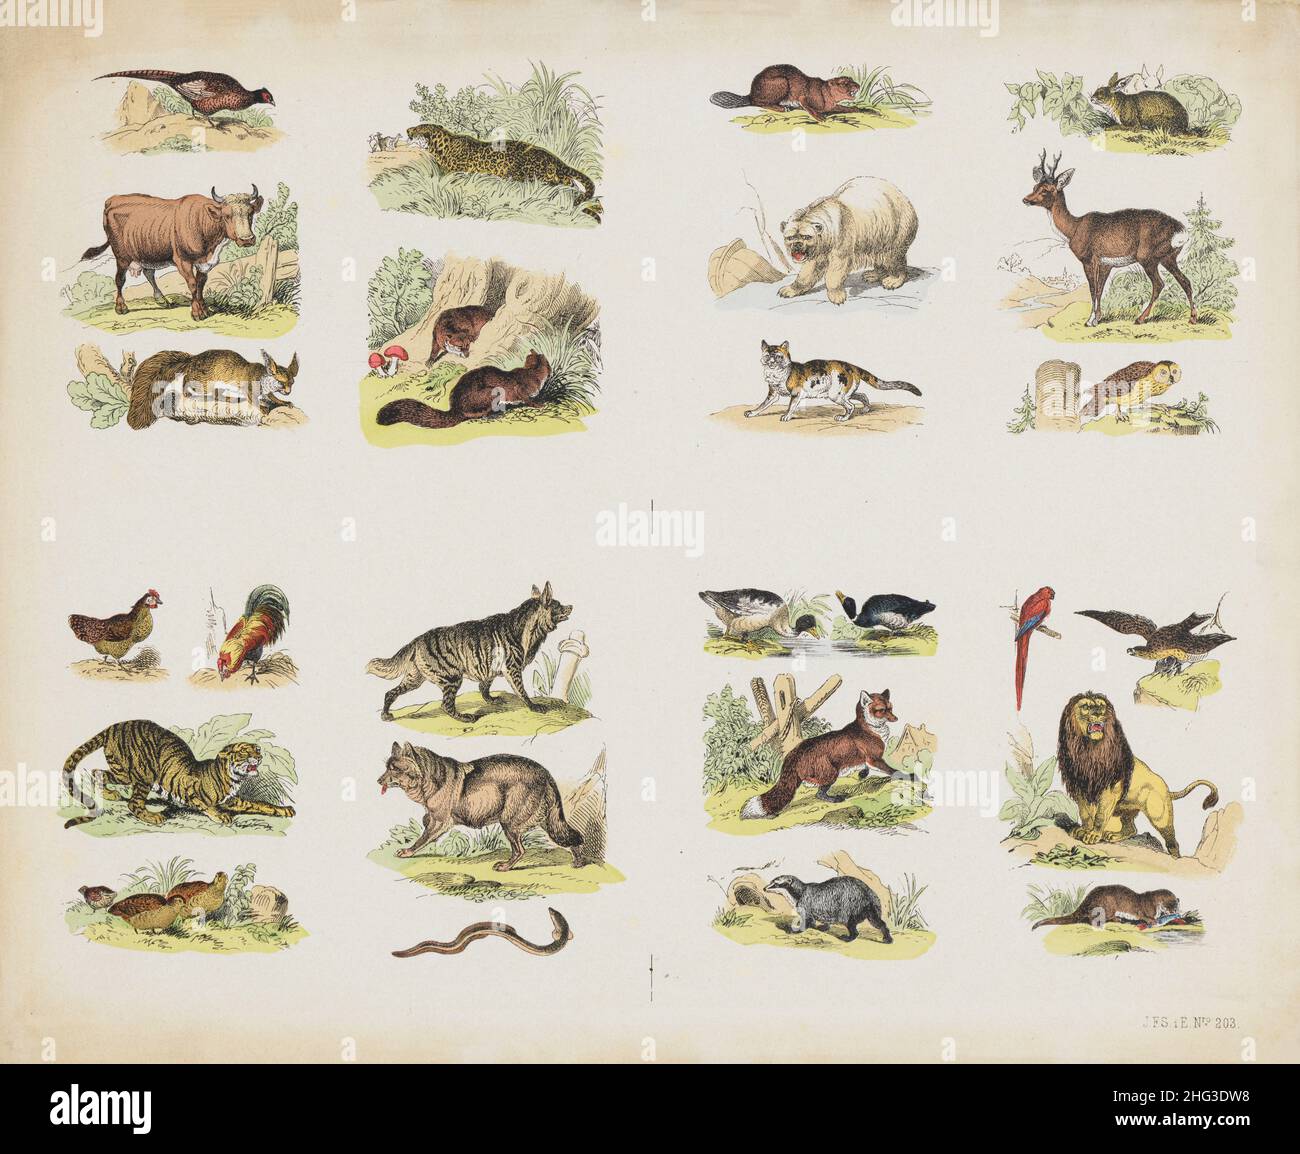 The 19th century color illustrations of wild animals and birds.  1870 Pheasant, cow, squirrel, jaguar, fox, beaver, hare, polar bear, roe deer, owl, d Stock Photo